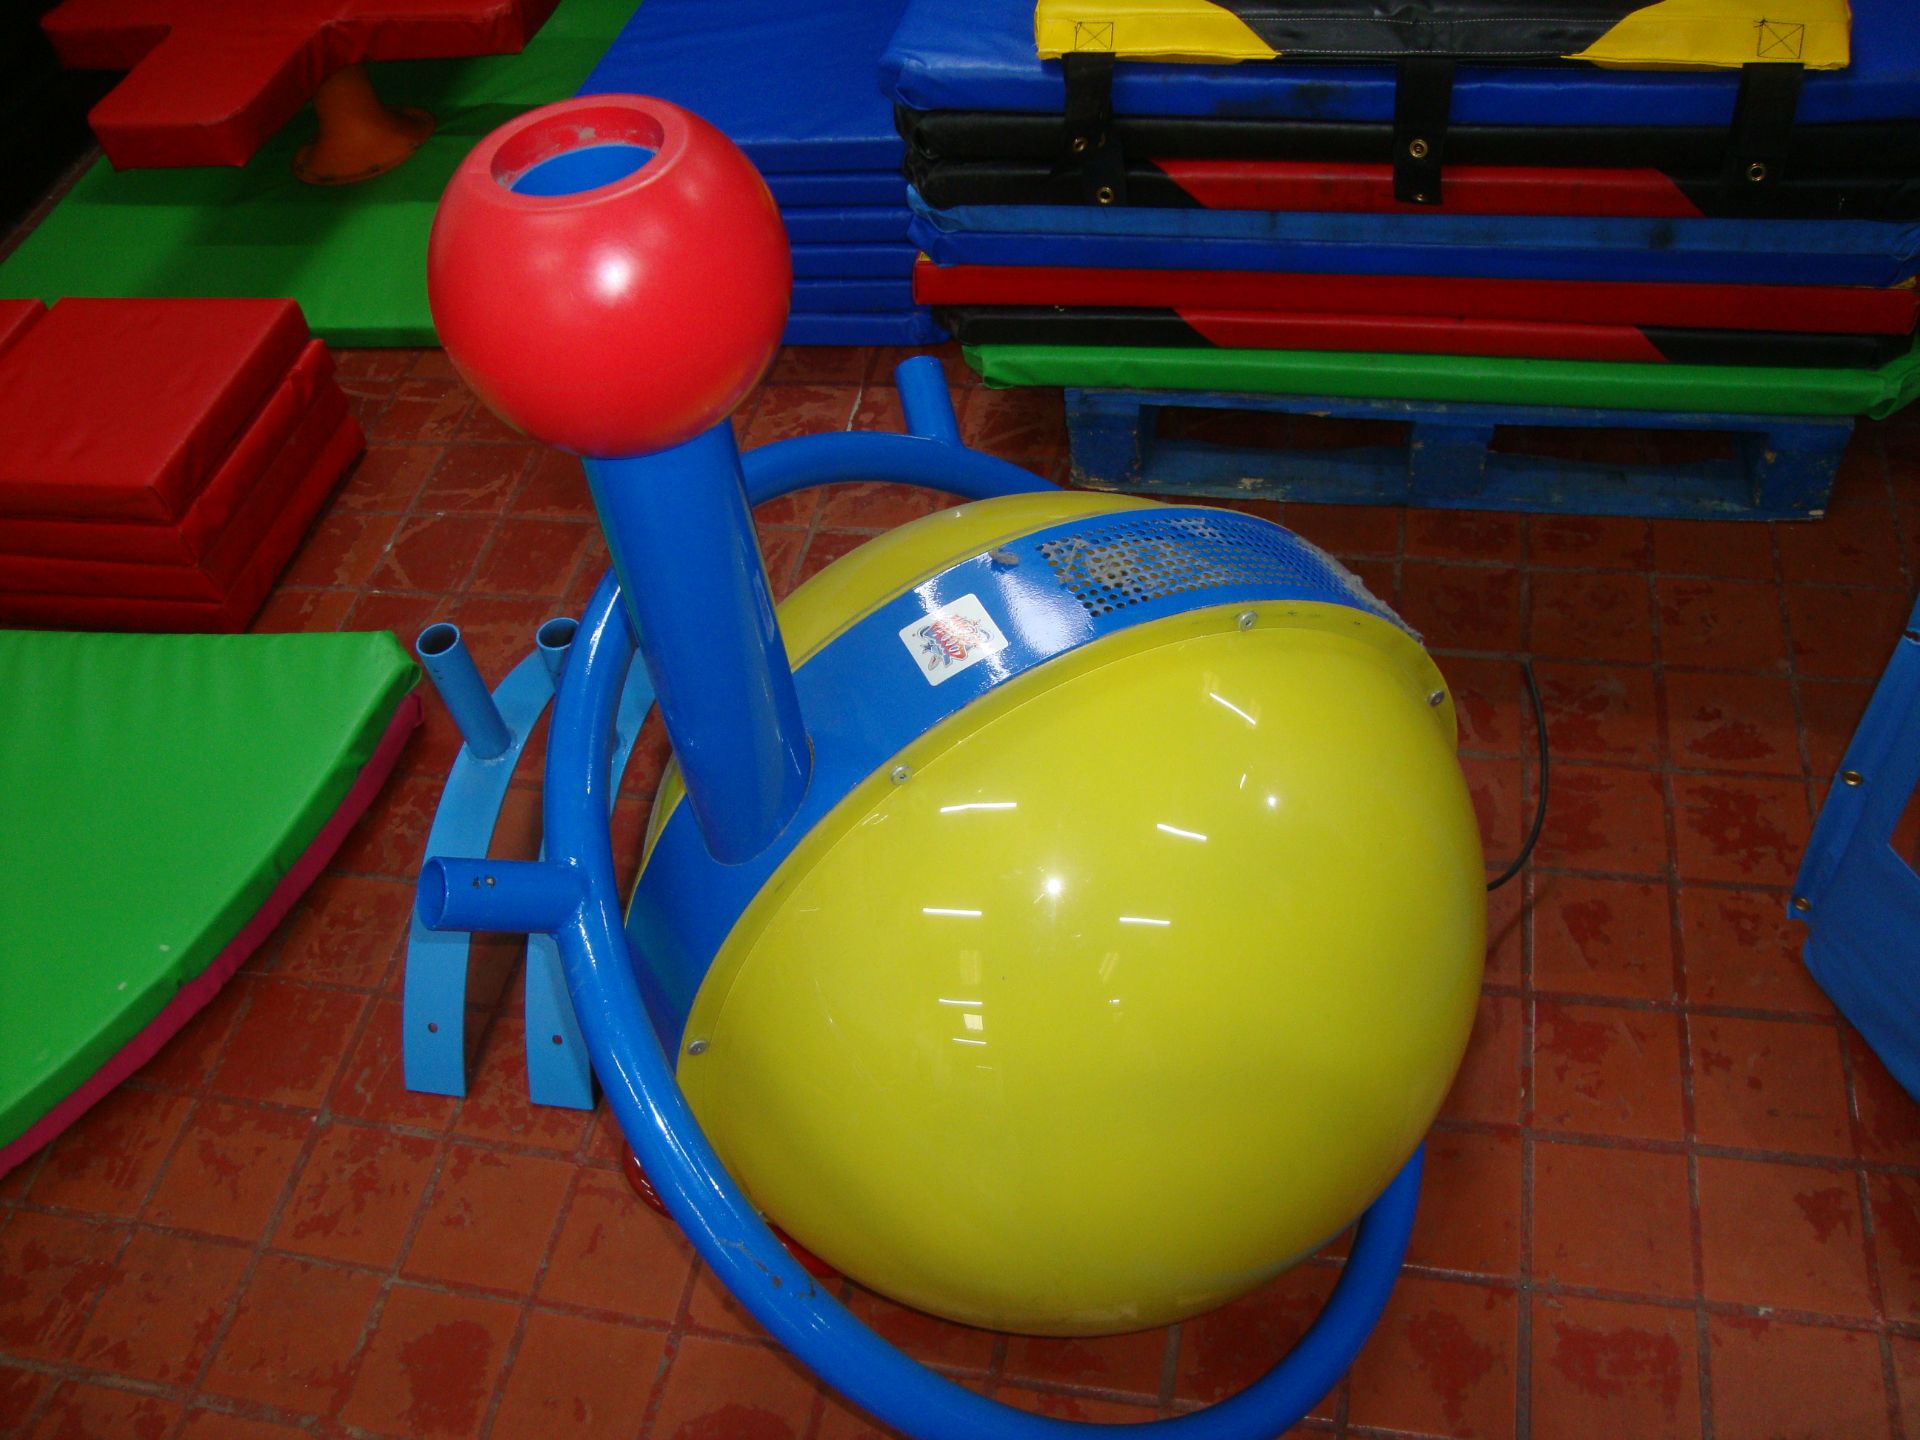 Soft Play Equipment - Image 19 of 25